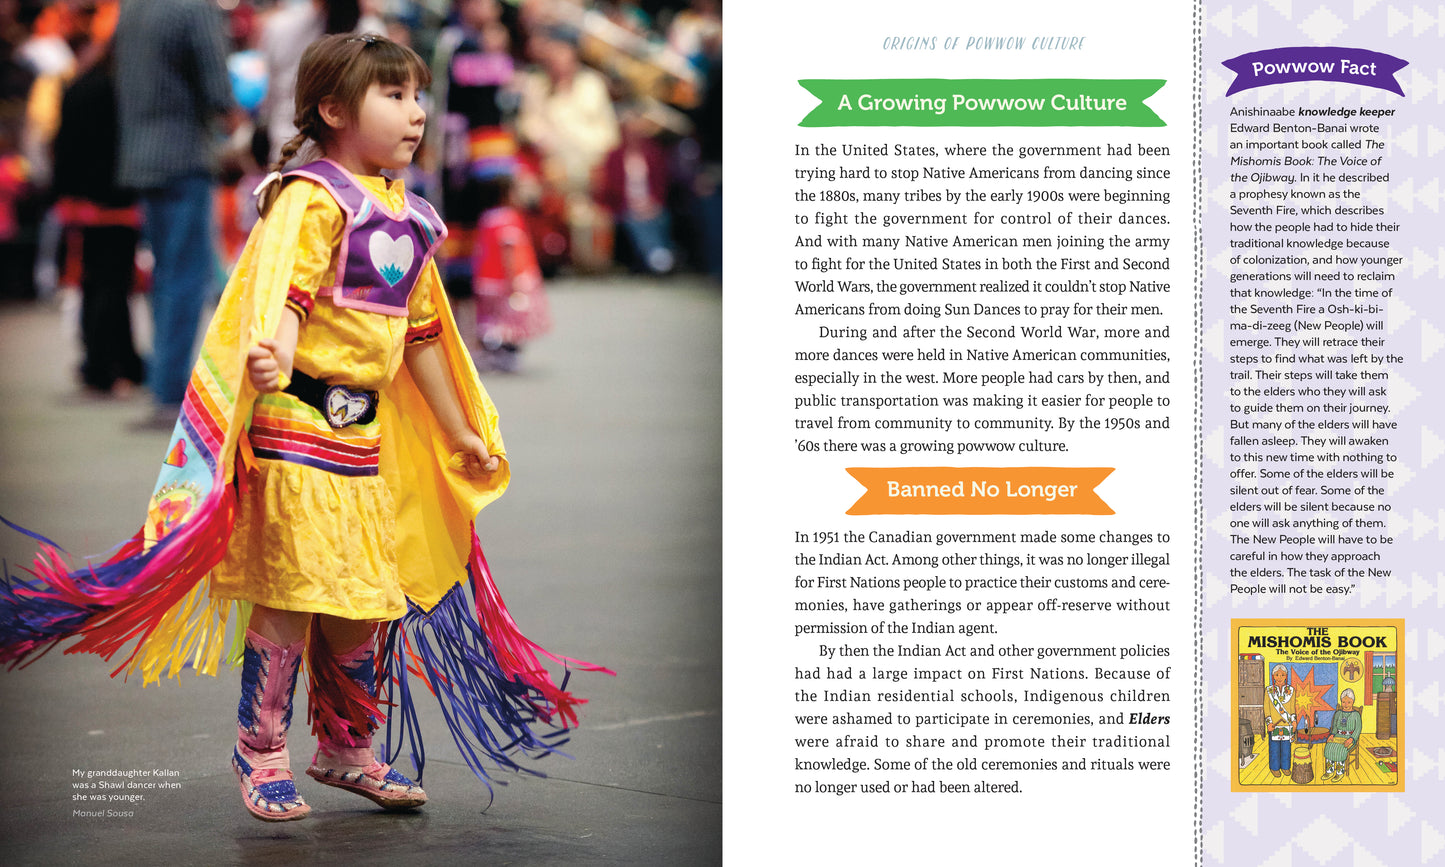 Powwow-A Celebration through Song and Dance